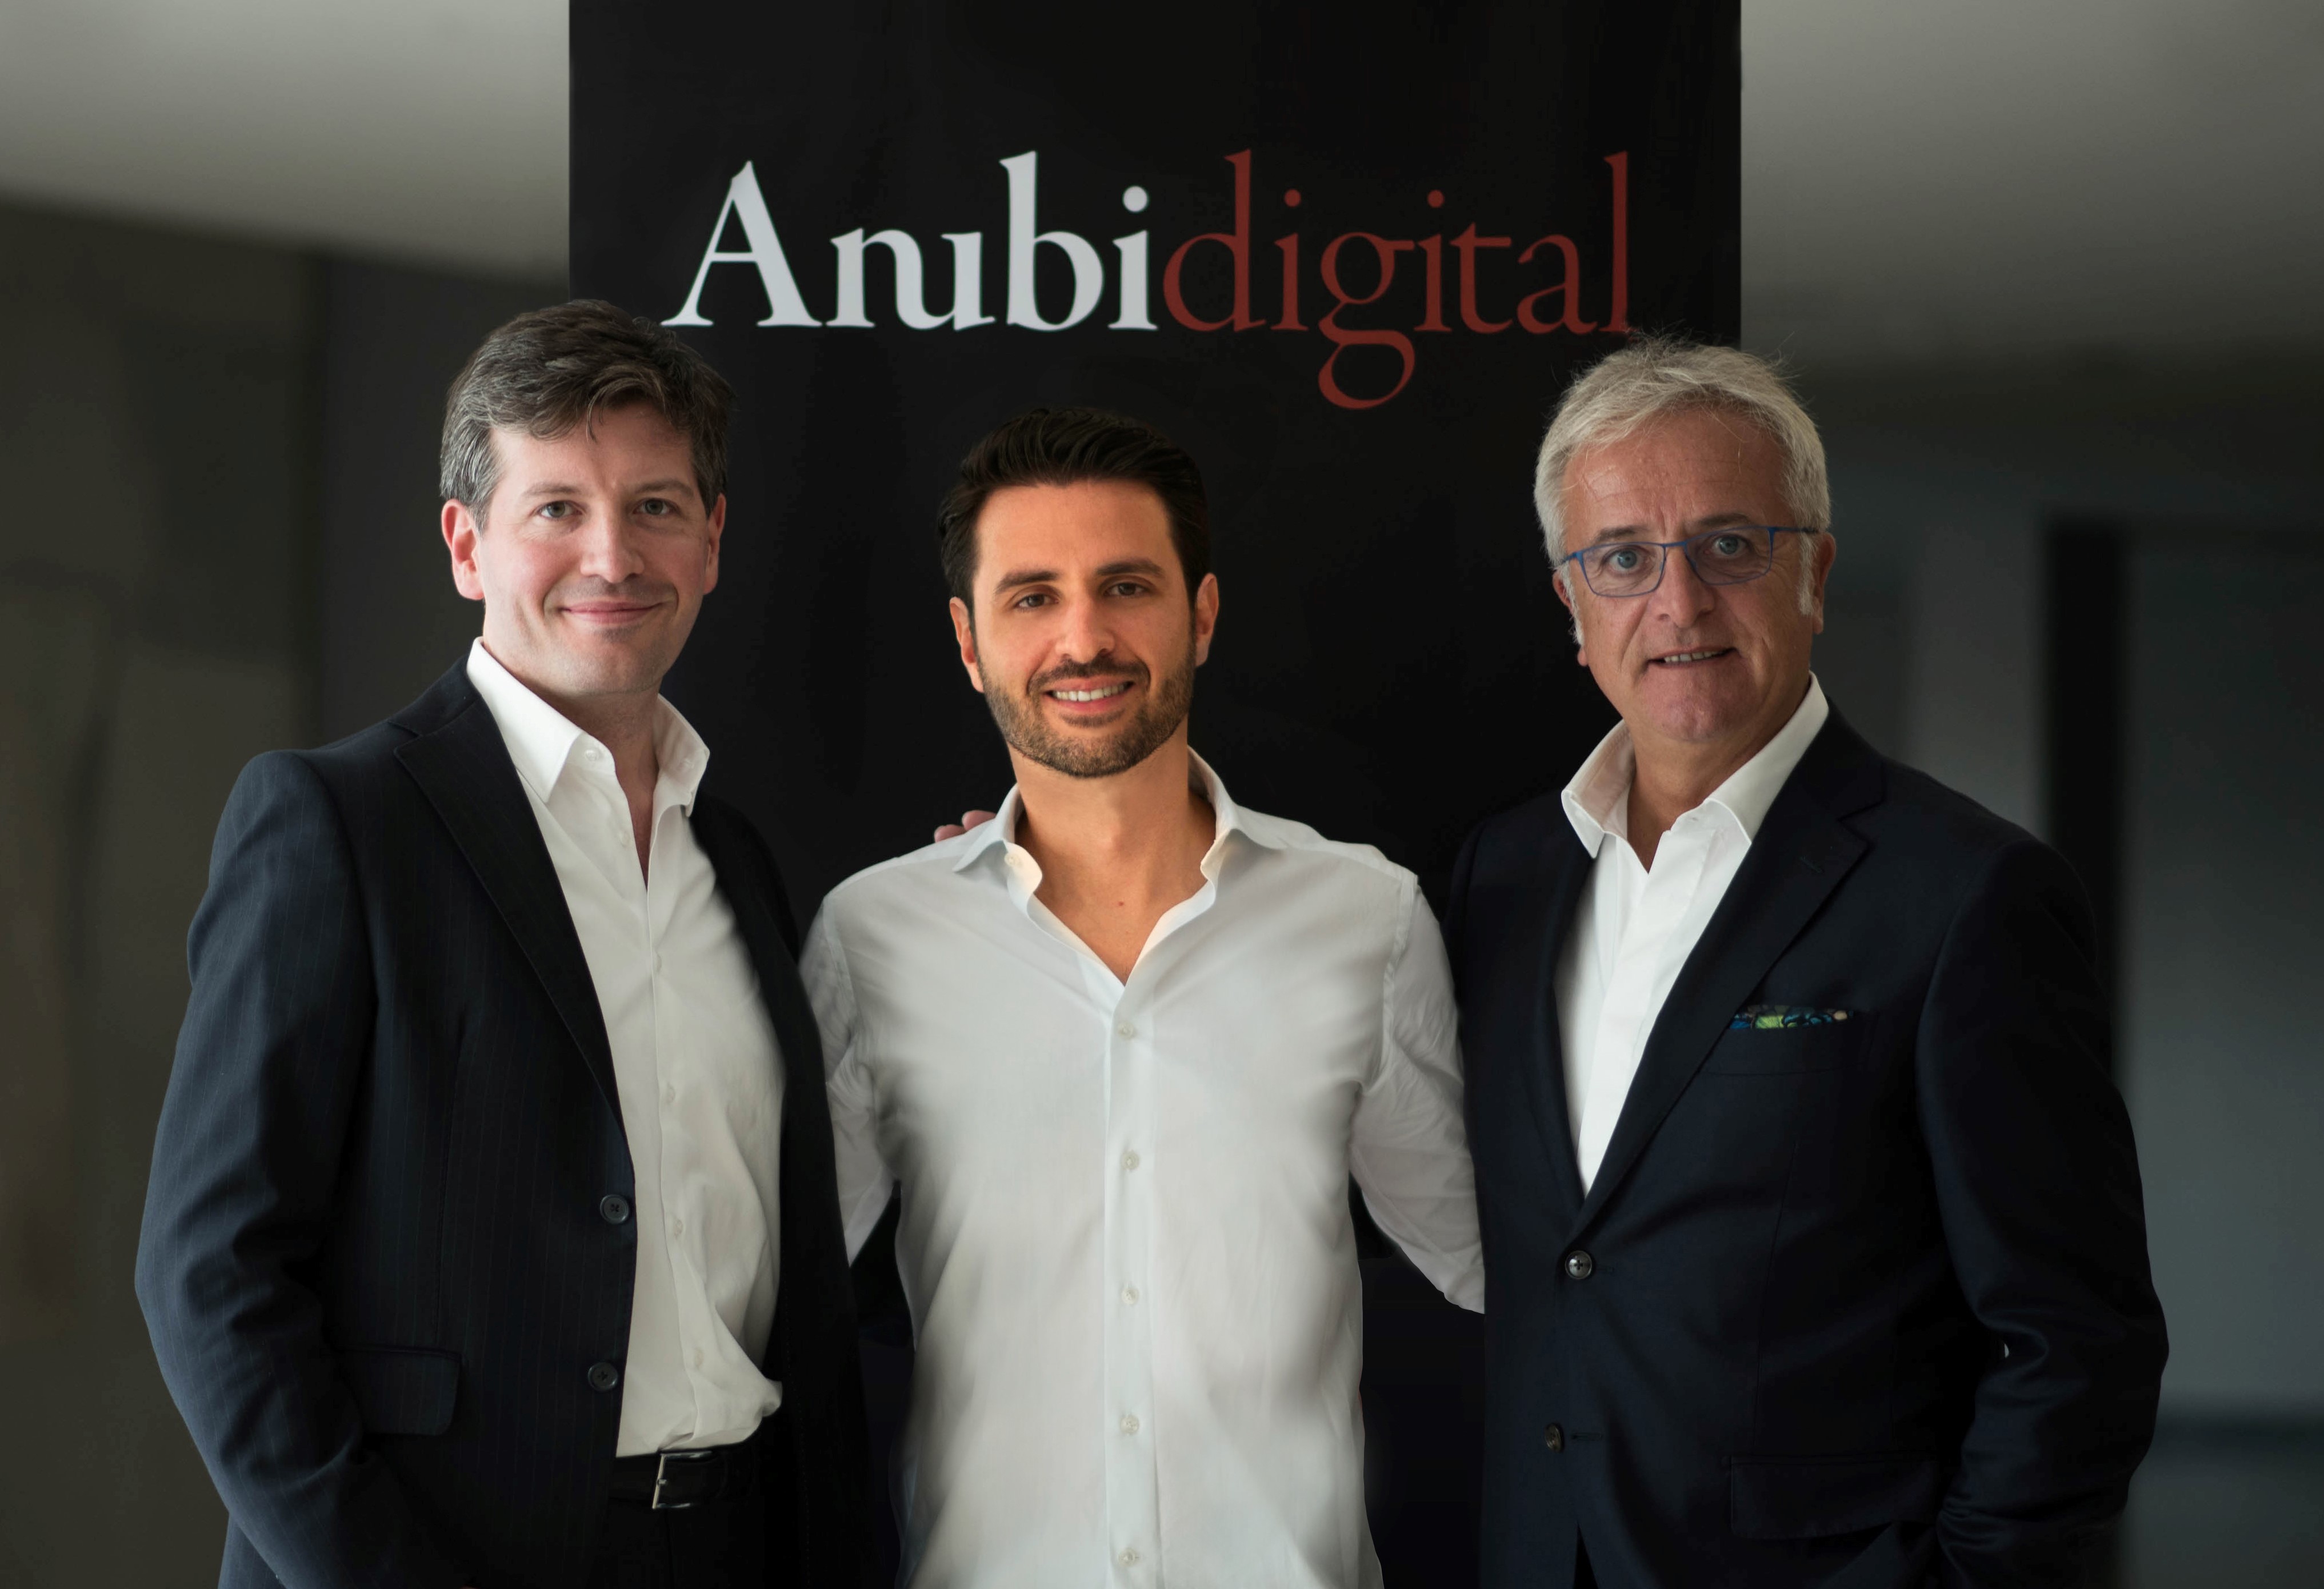 Anubi Digital is the First Italian Platform to Safely Custody your Bitcoin and Other Cryptocurrencies and have them Work in DeFi